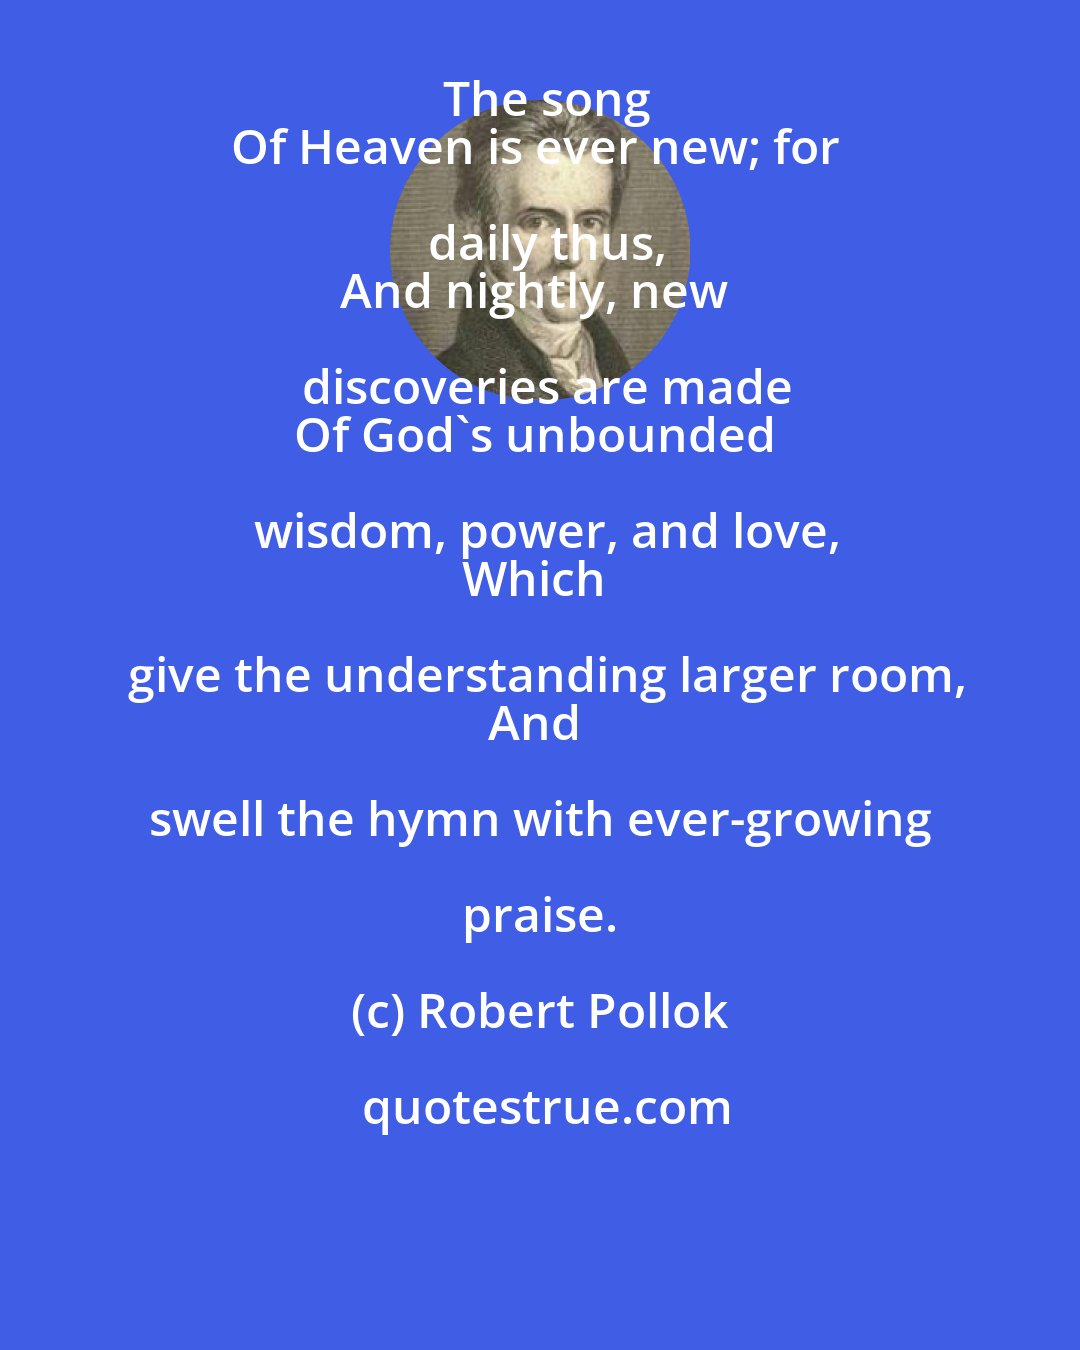 Robert Pollok: The song
Of Heaven is ever new; for daily thus,
And nightly, new discoveries are made
Of God's unbounded wisdom, power, and love,
Which give the understanding larger room,
And swell the hymn with ever-growing praise.